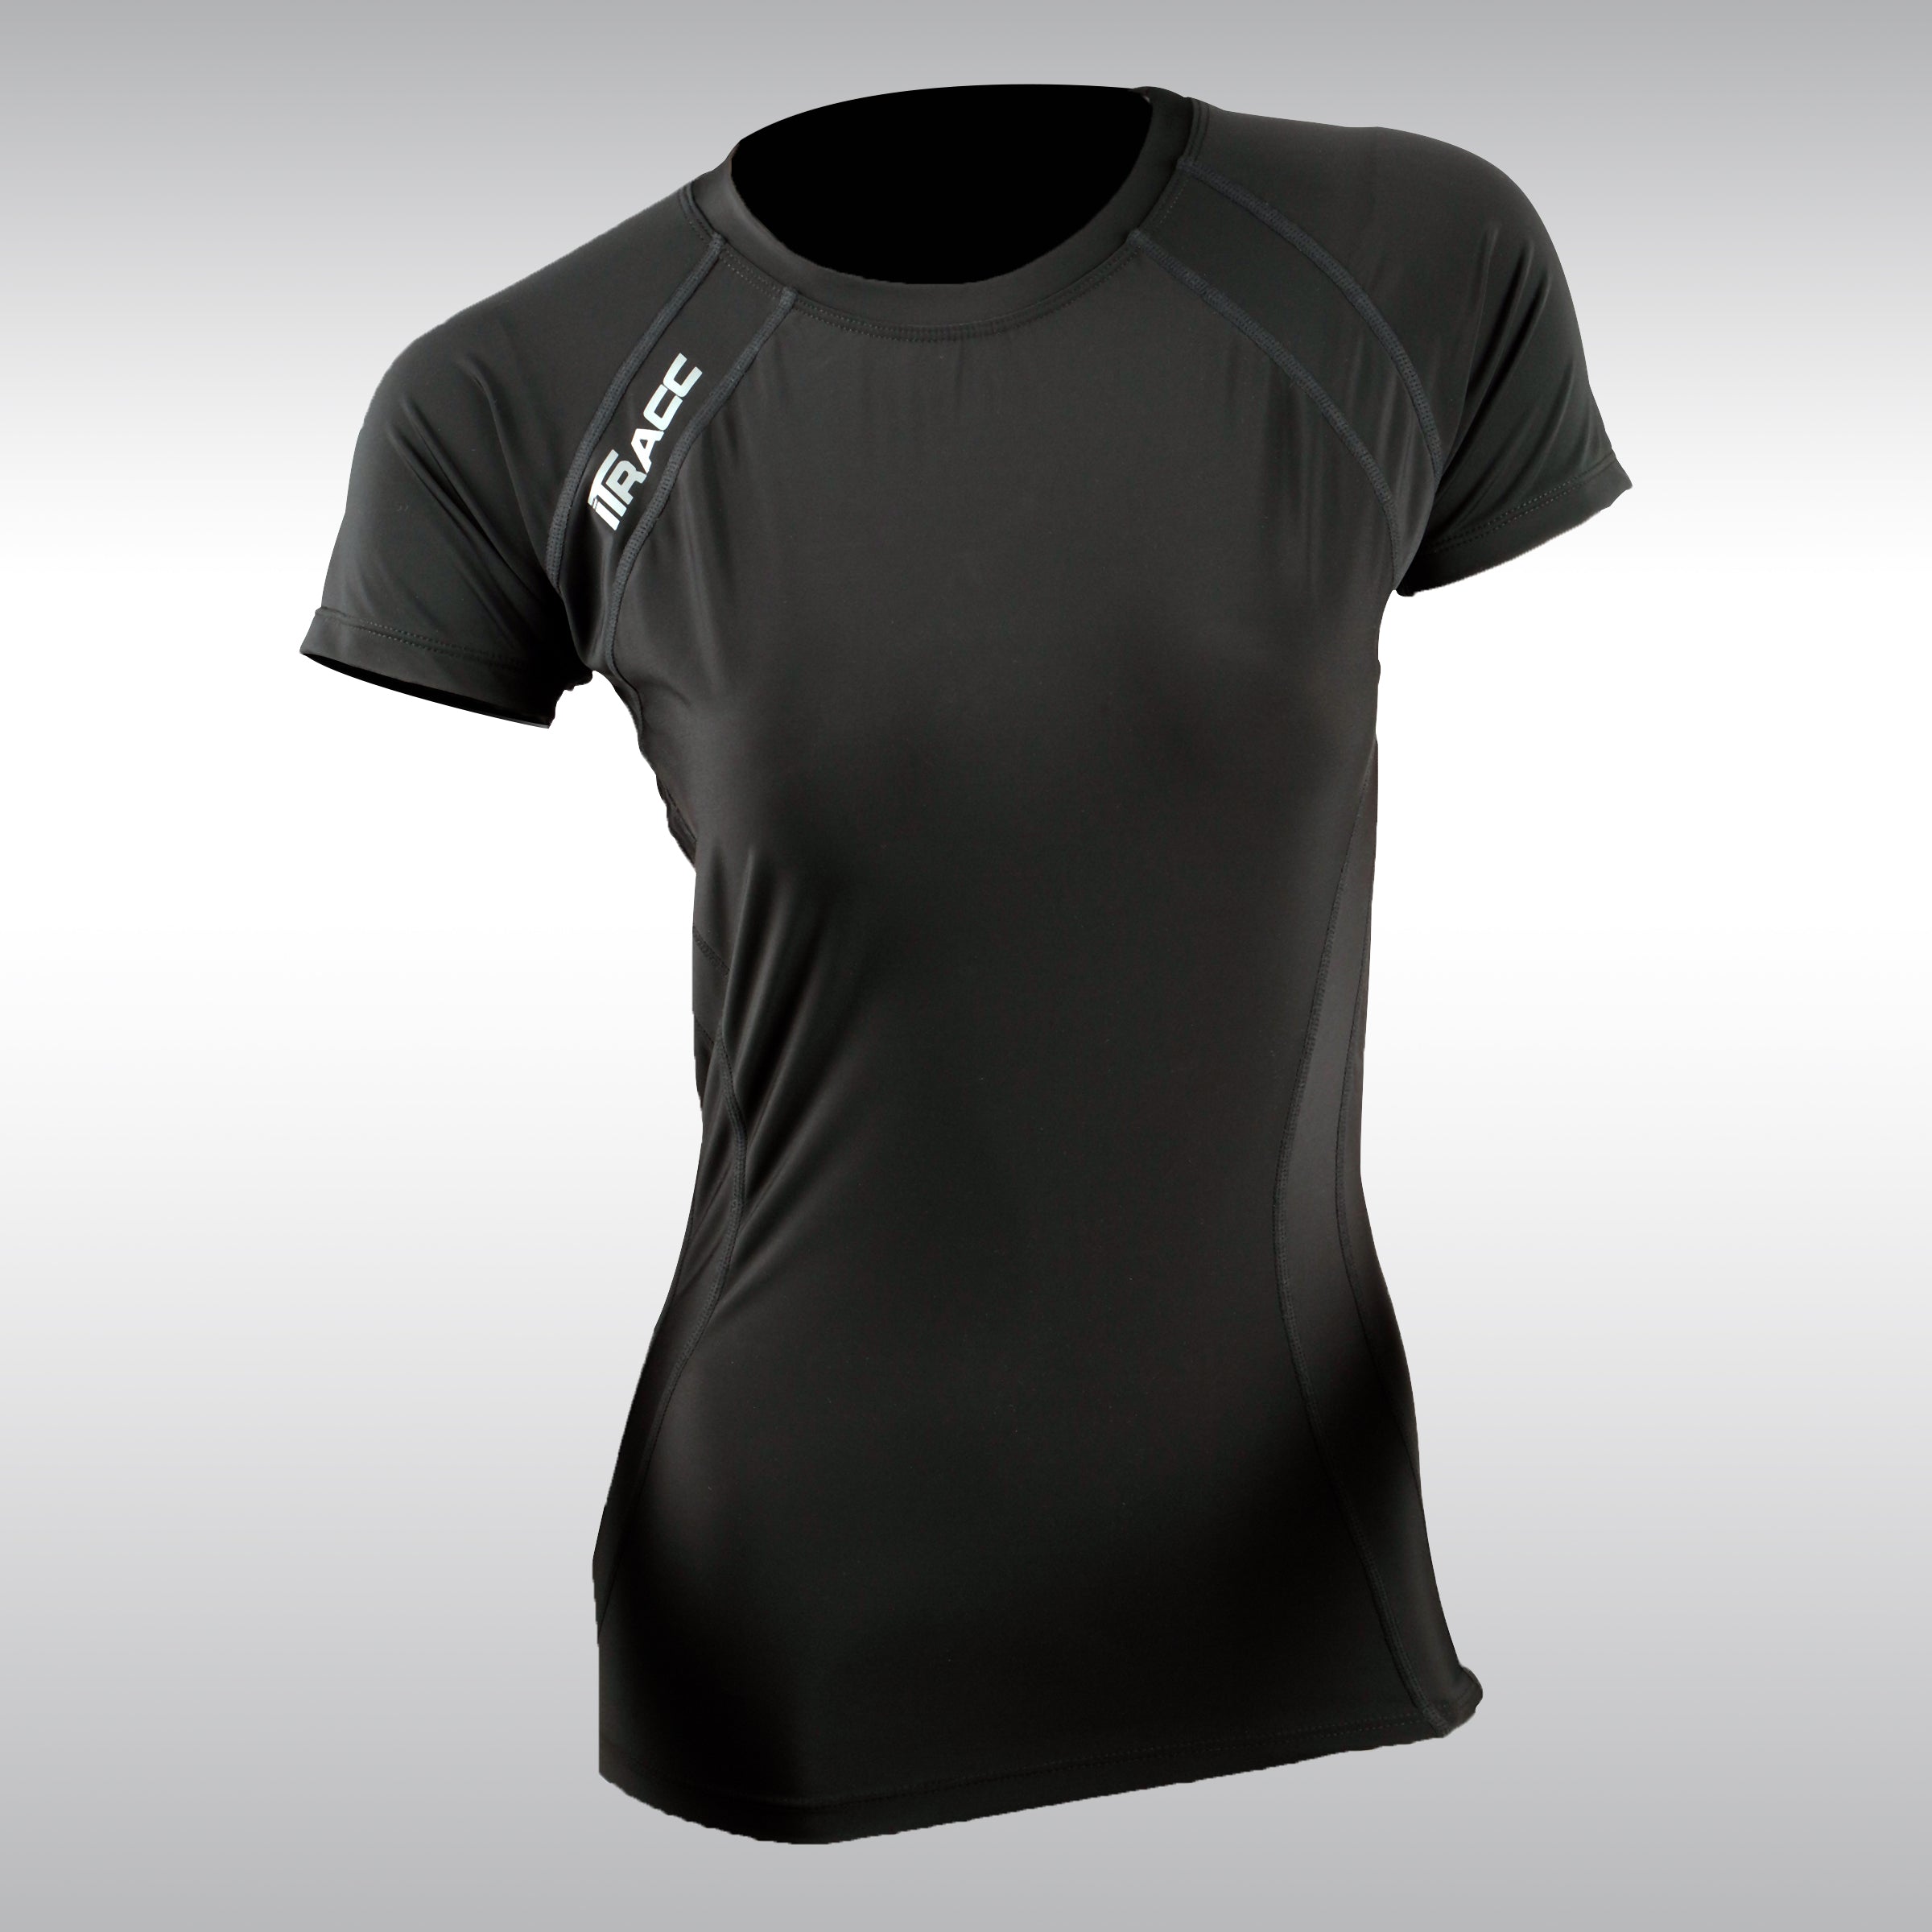 ITRACC, SHORT SLEEVES COMPRESSION SHIRT FOR WOMEN